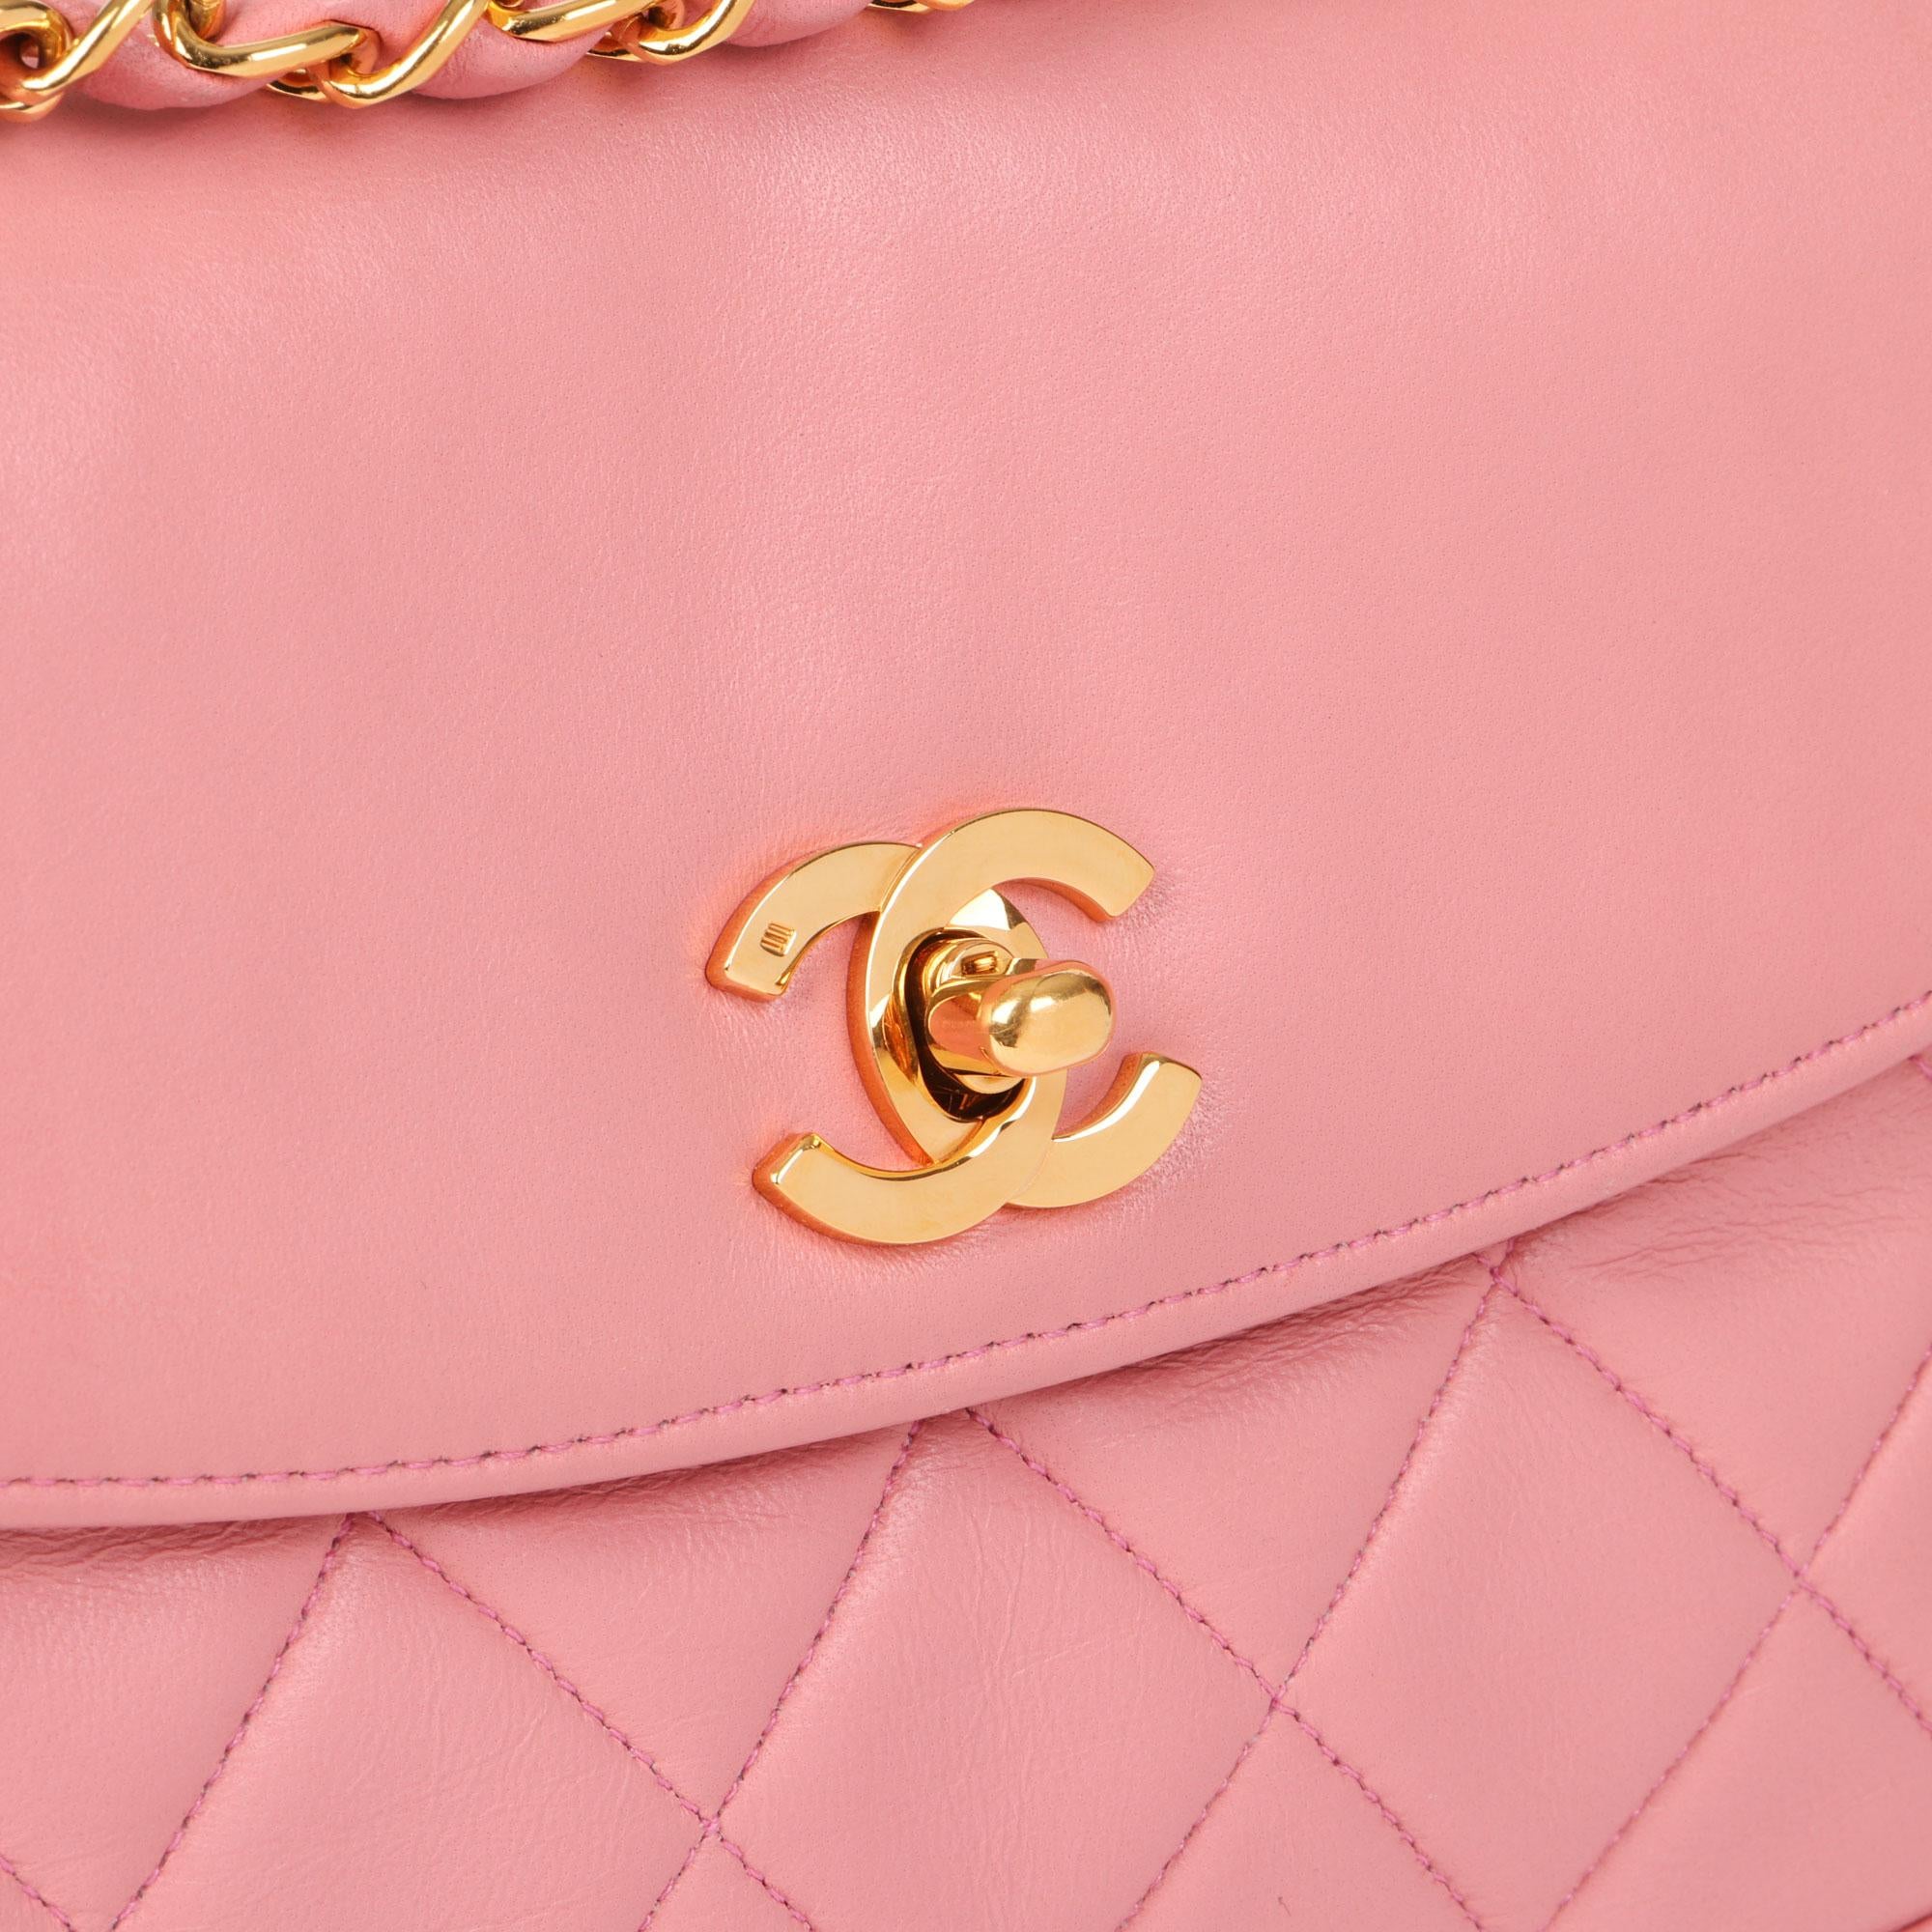 CHANEL
Pink Quilted Lambskin Vintage Medium Classic Single Flap Bag

Xupes Reference: HB4090
Serial Number: 1796470
Age (Circa): 1990
Accompanied By: Chanel Dust Bag, Authenticity Card
Authenticity Details: Authenticity Card, Serial Sticker (Made in